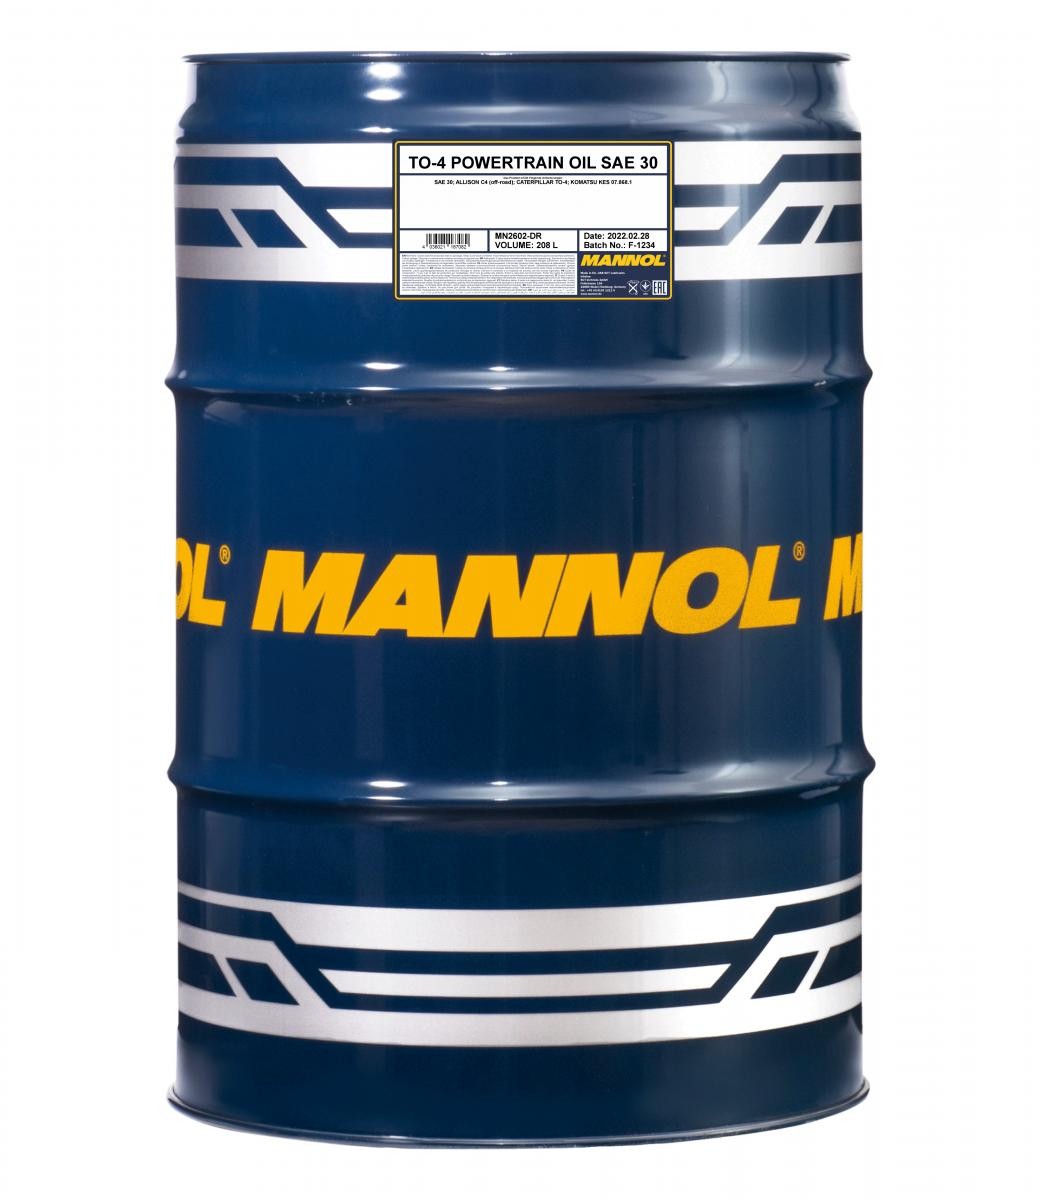 MANNOL TO-4 Powertrain MN2602-DR Transmission fluid SAE 30, Mineral Oil, Capacity: 208l